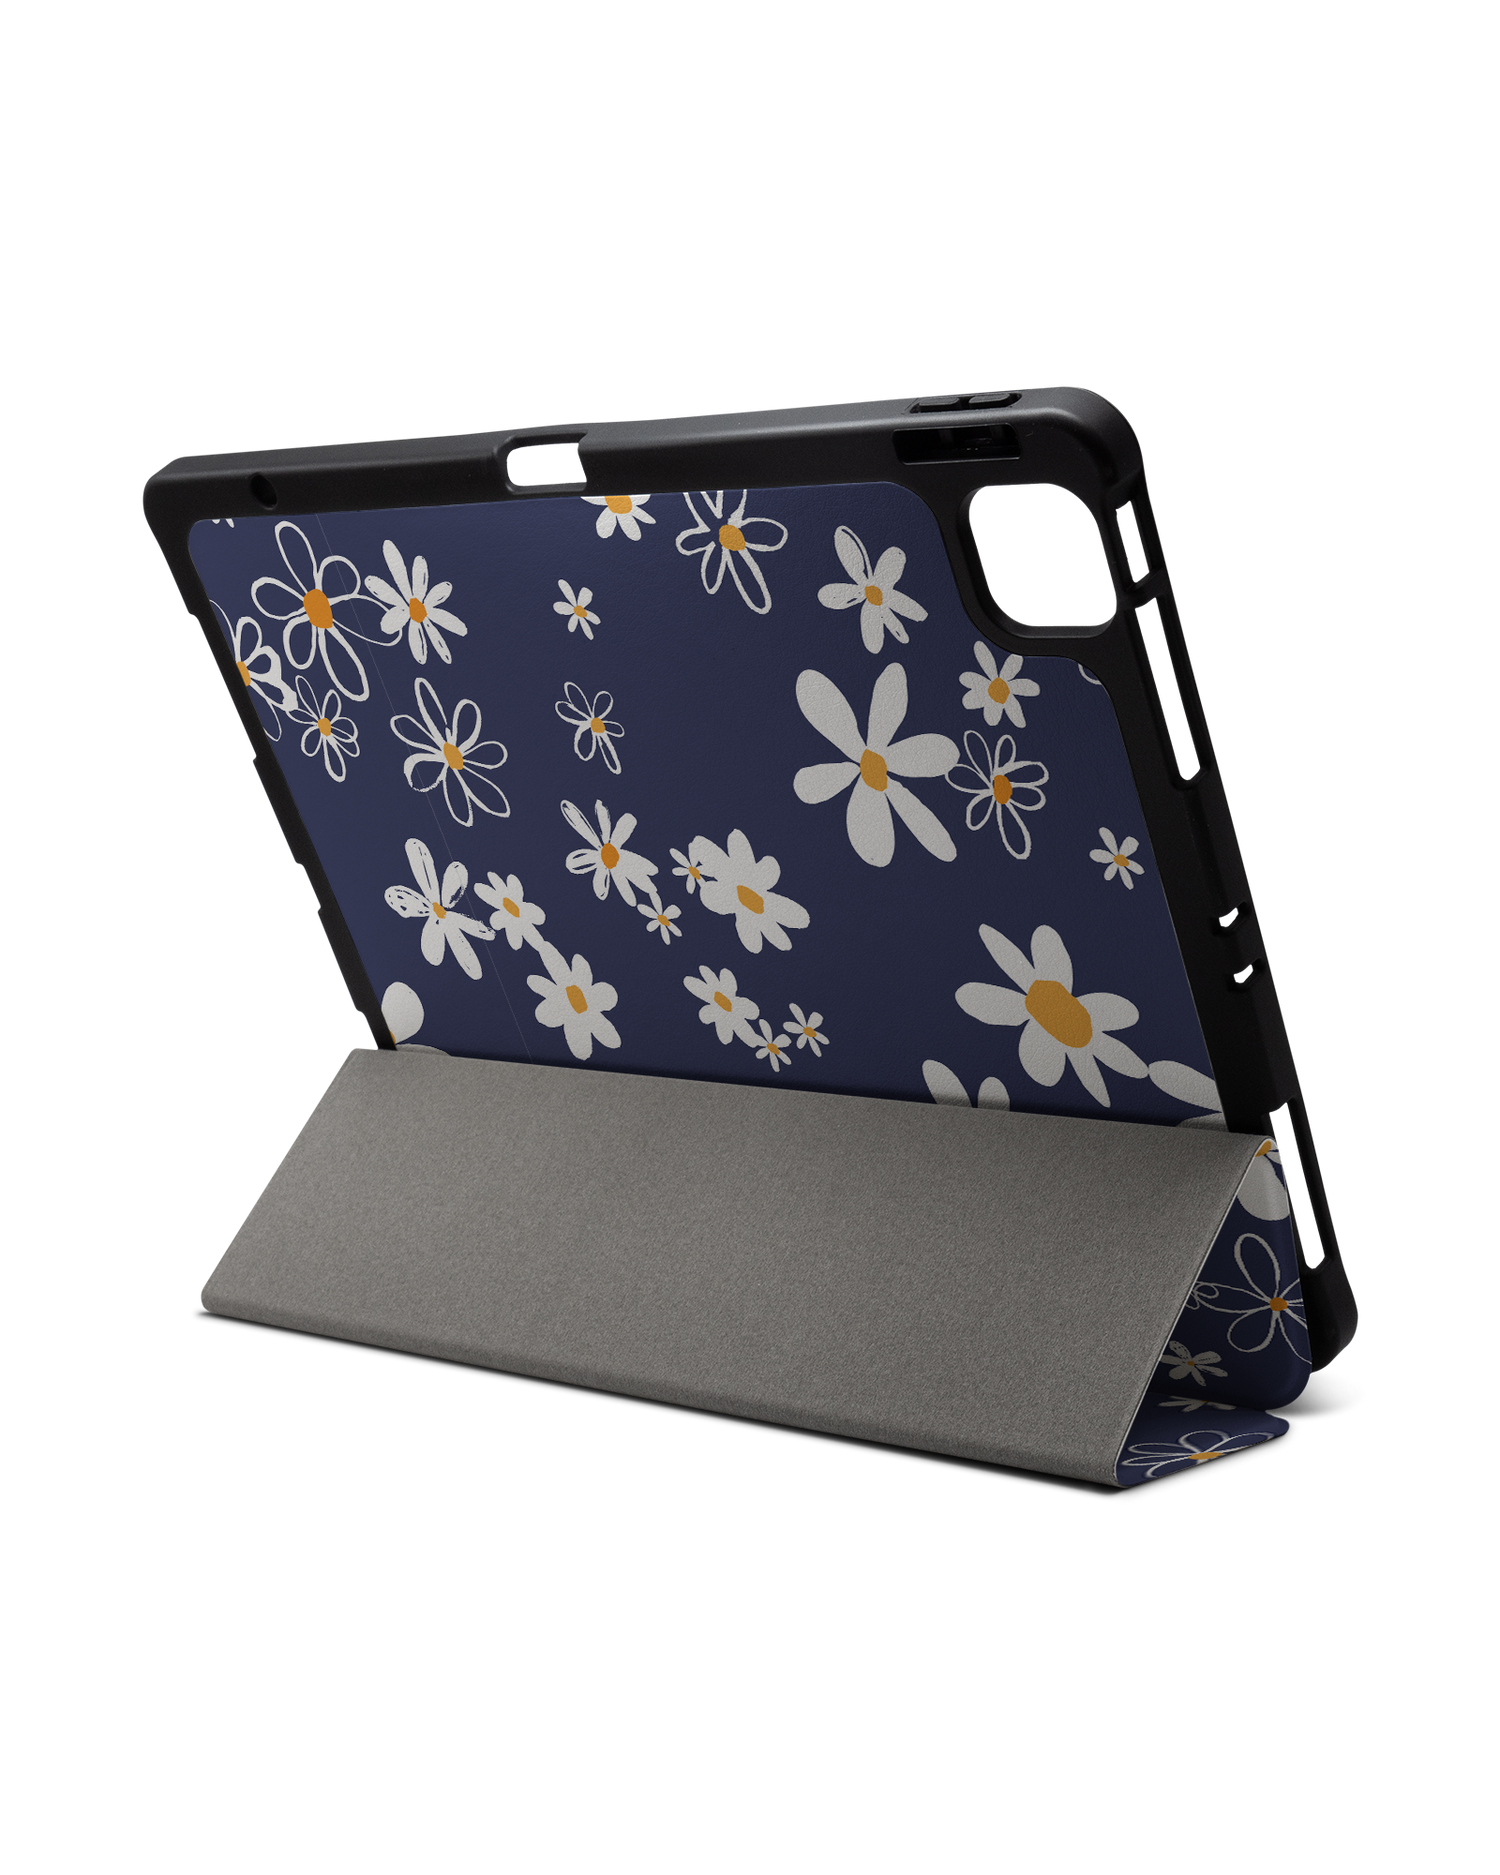 Navy Daisies iPad Case with Pencil Holder for Apple iPad Pro 6 12.9